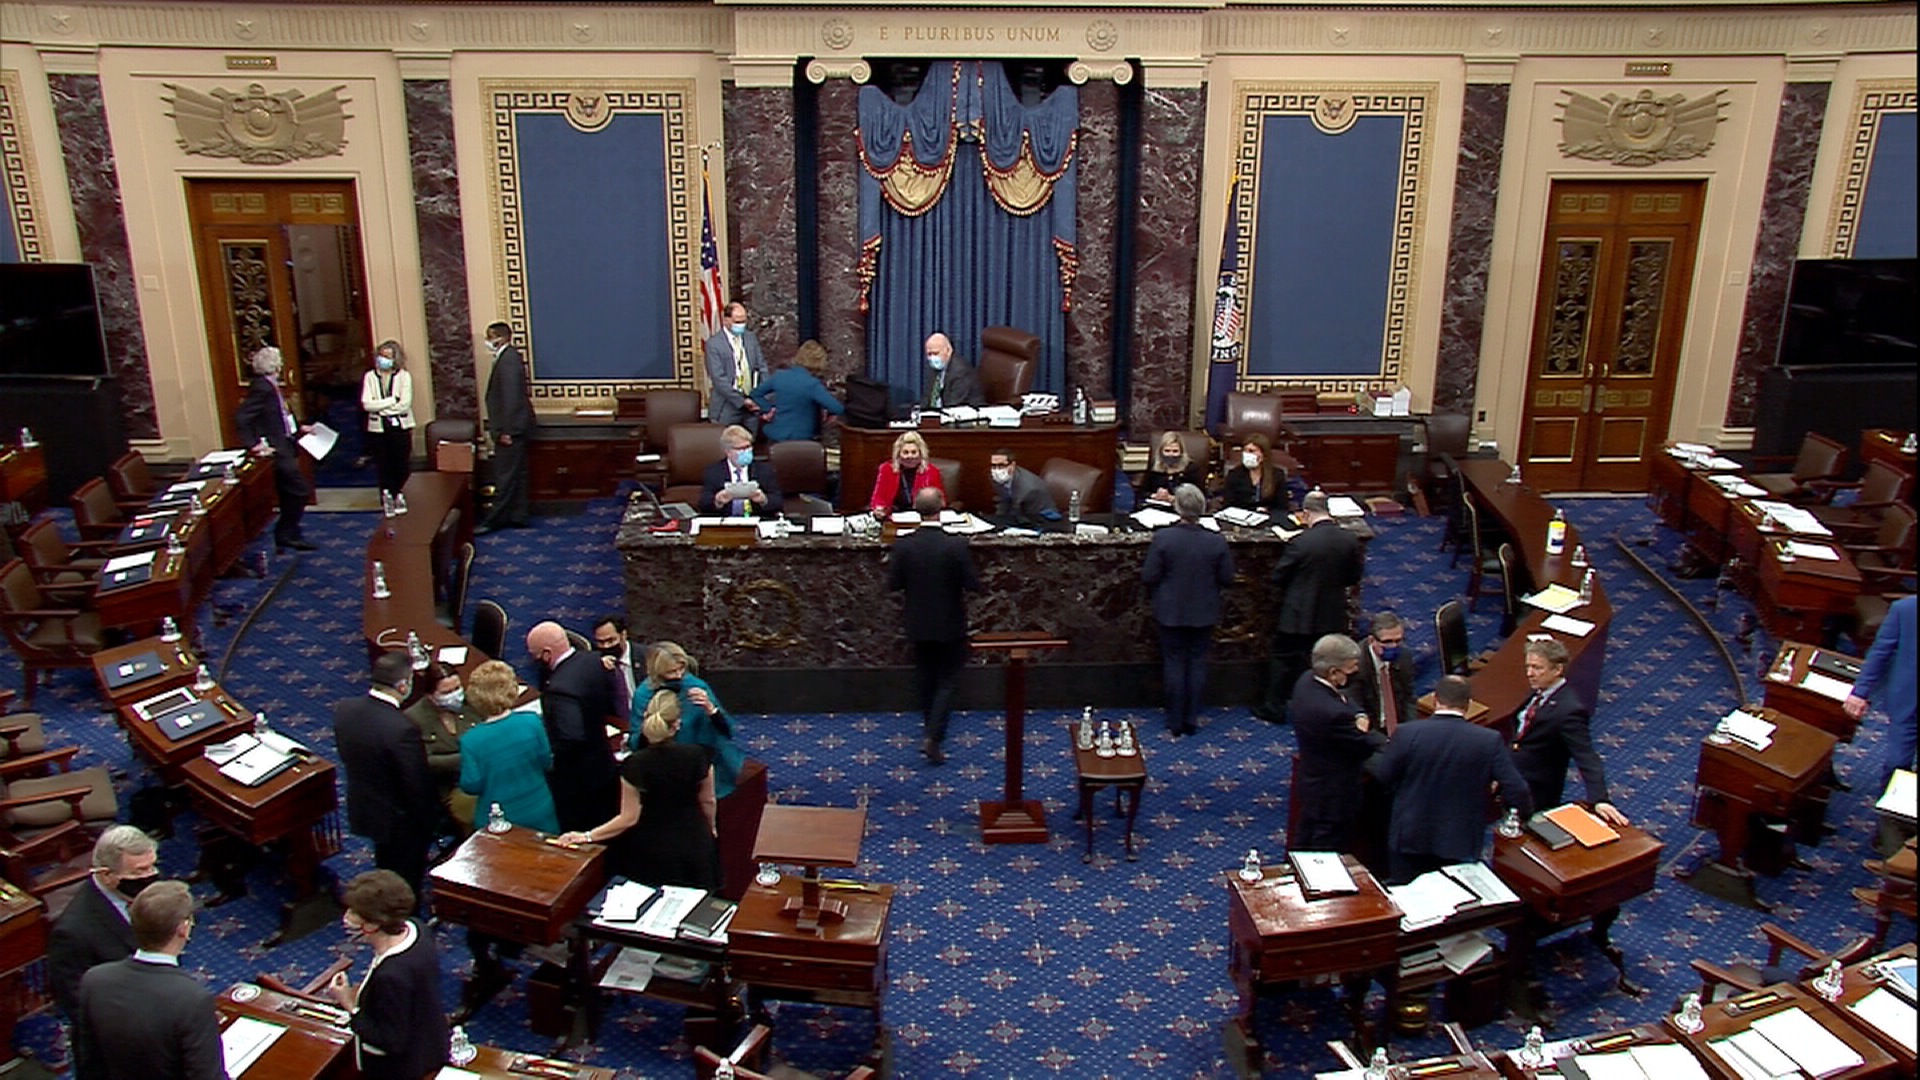 Heres Whats Happening On The Senate Floor Now Following The Witness Vote 